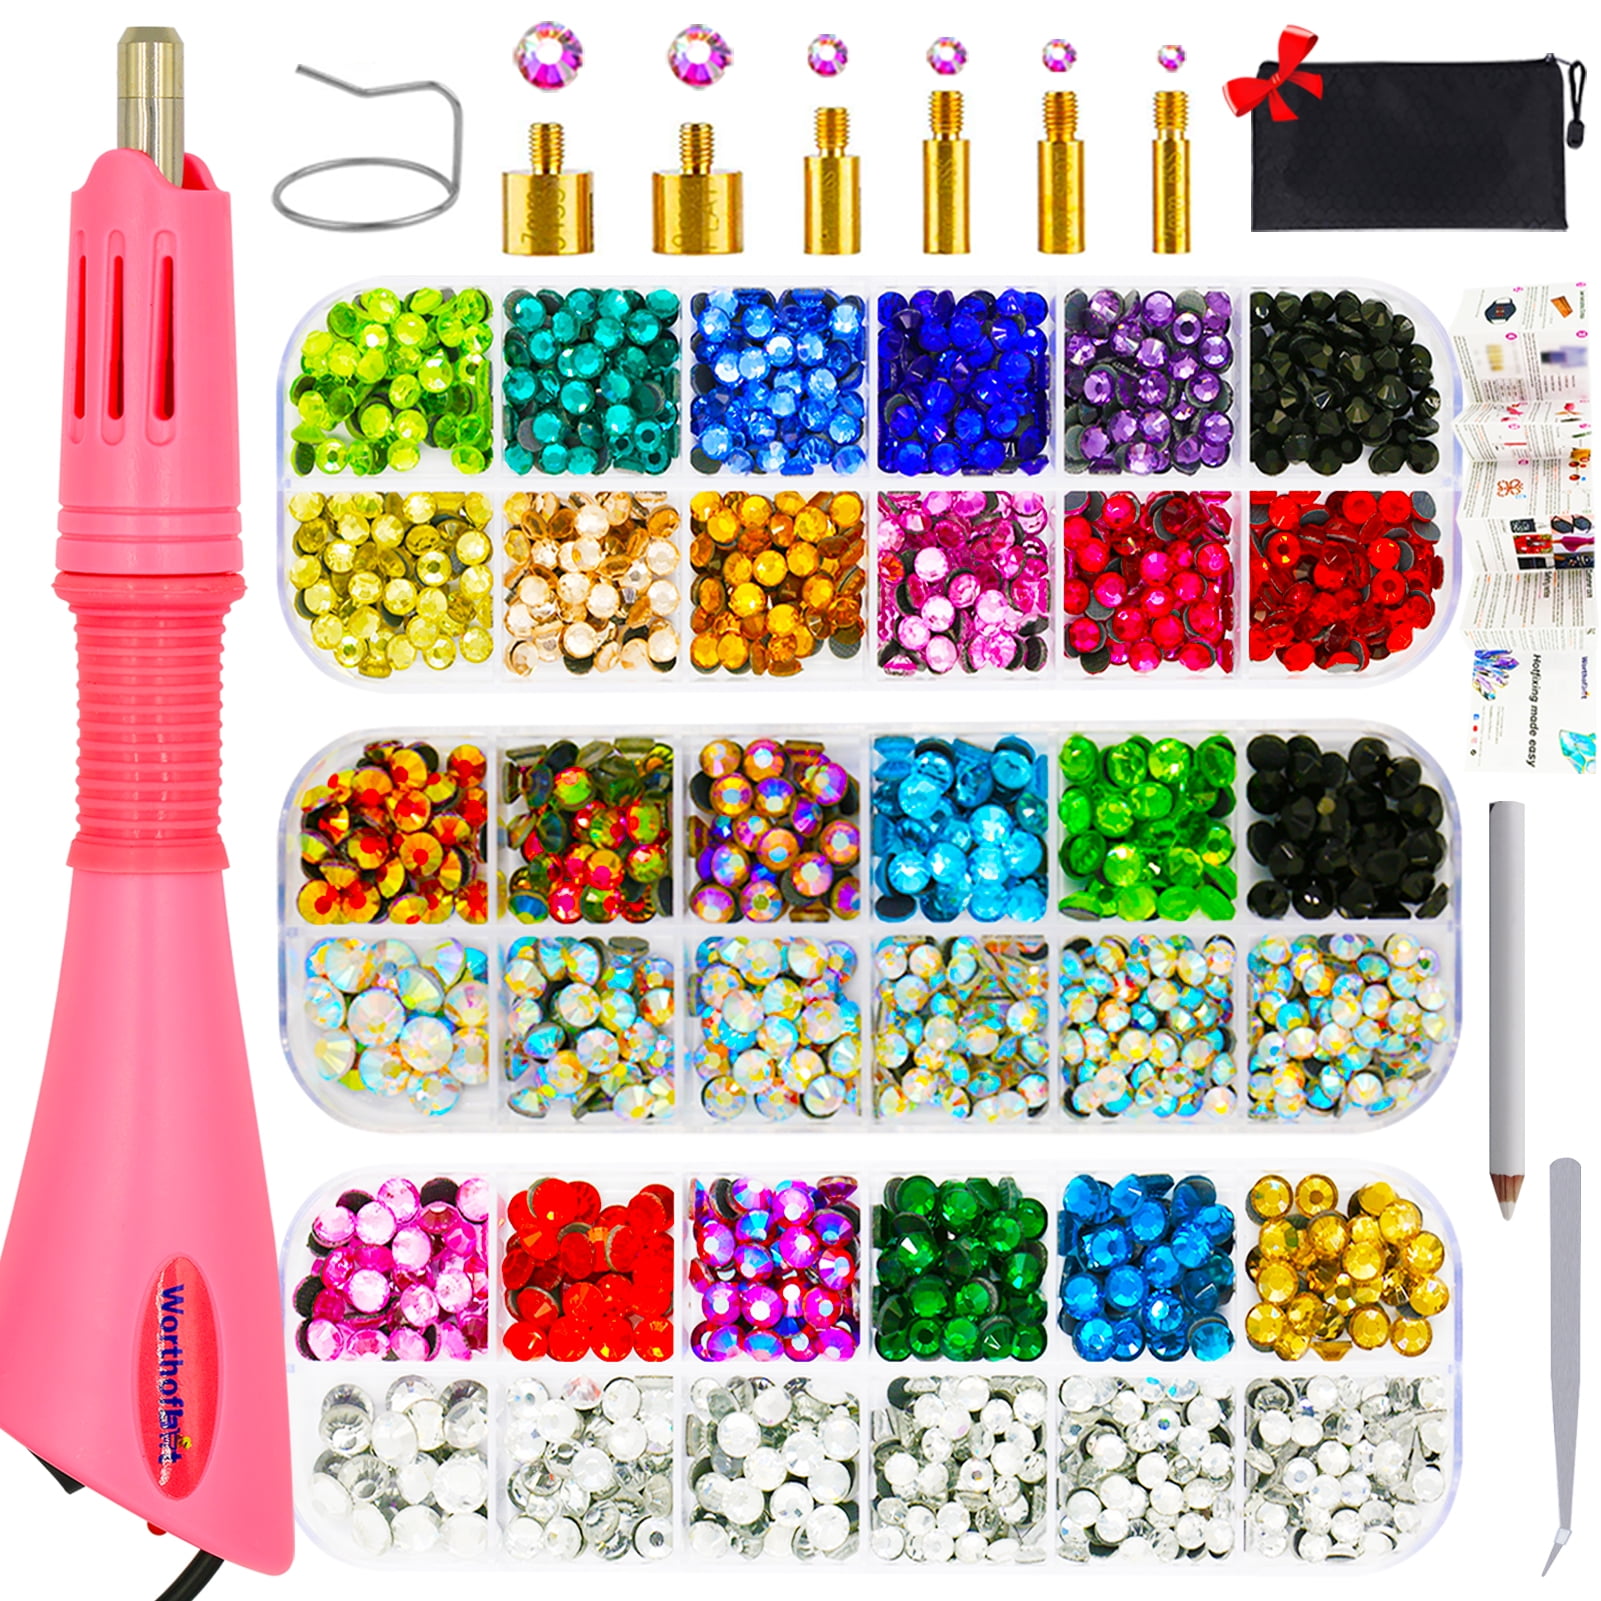 Hotfix Applicator Rhinestones, Hot Fixed Bedazzler Kit, GGLTECK DIY Hot Fix Rhinestone Applicator Wand Setter Tool Kit with 7 Different Sizes Tips